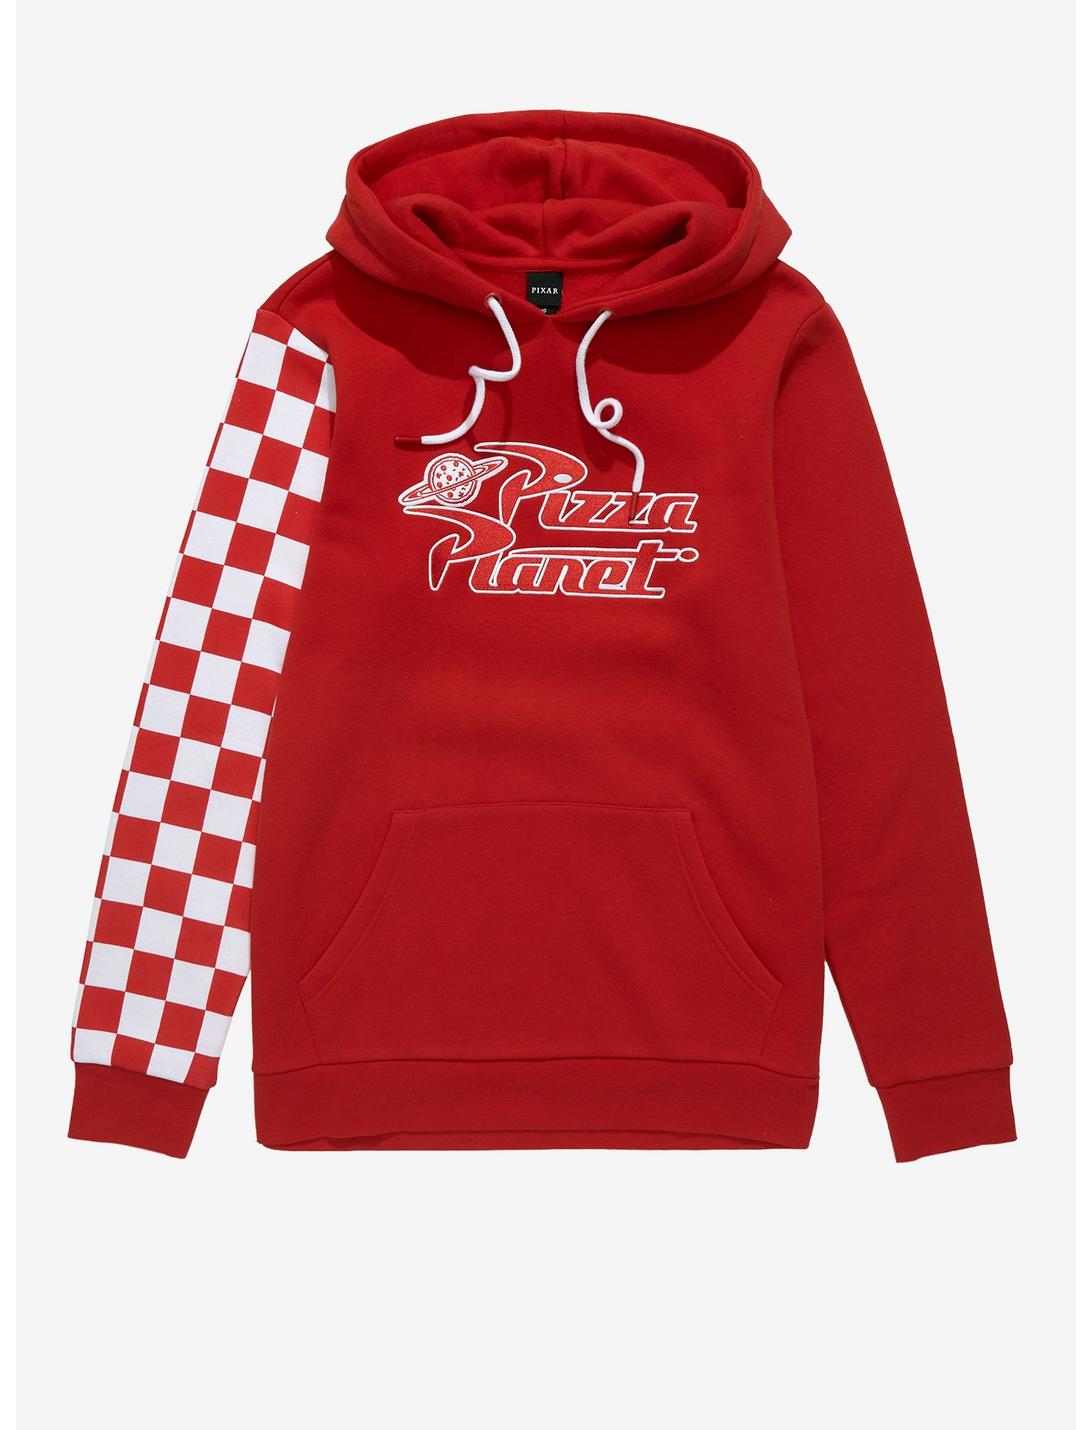 Disney Pixar Toy Story Pizza Planet Checkered Hoodie - BoxLunch Exclusive, RED, hi-res